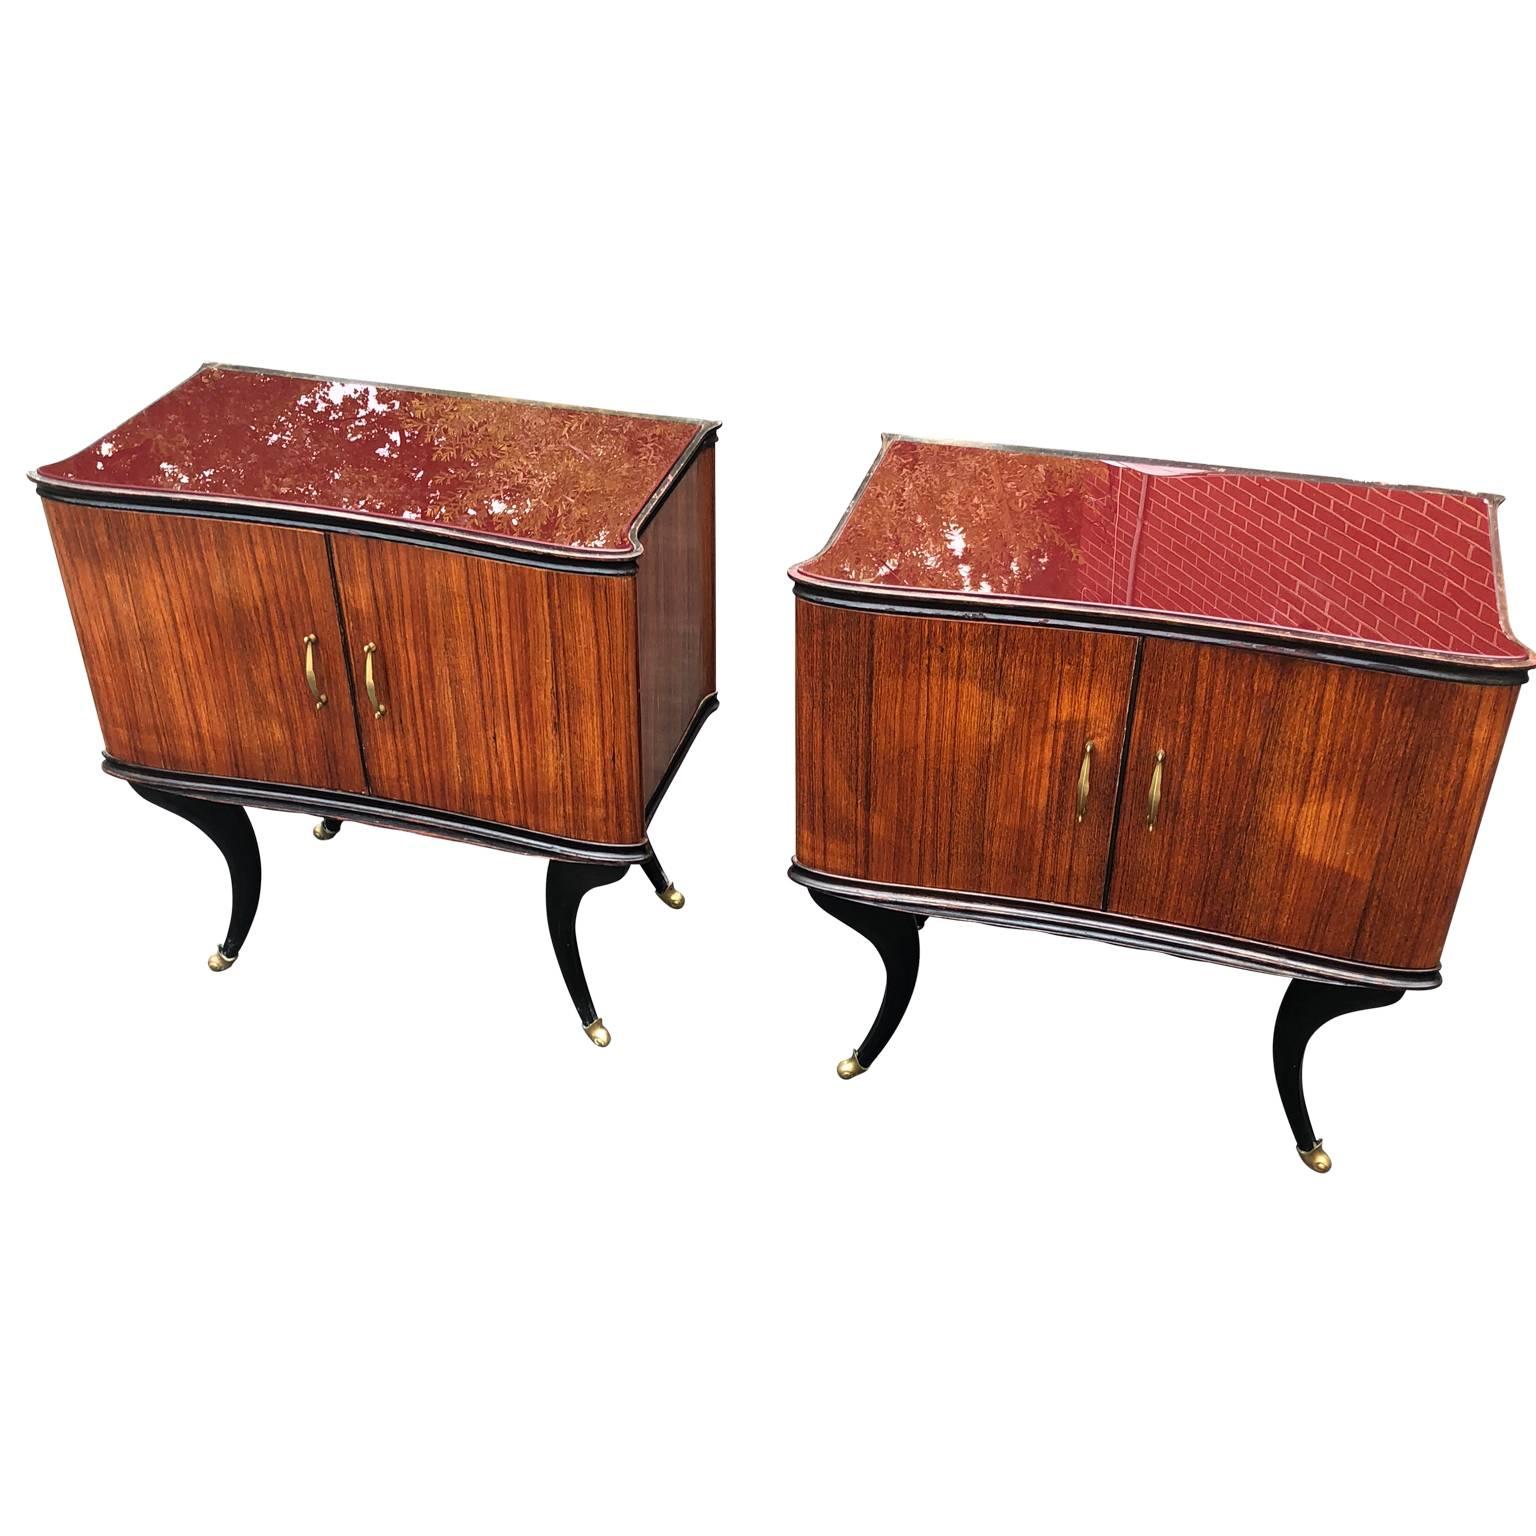 Pair of Italian Mid-Century Modern red glass-top bedside tables on brass-capped feet.